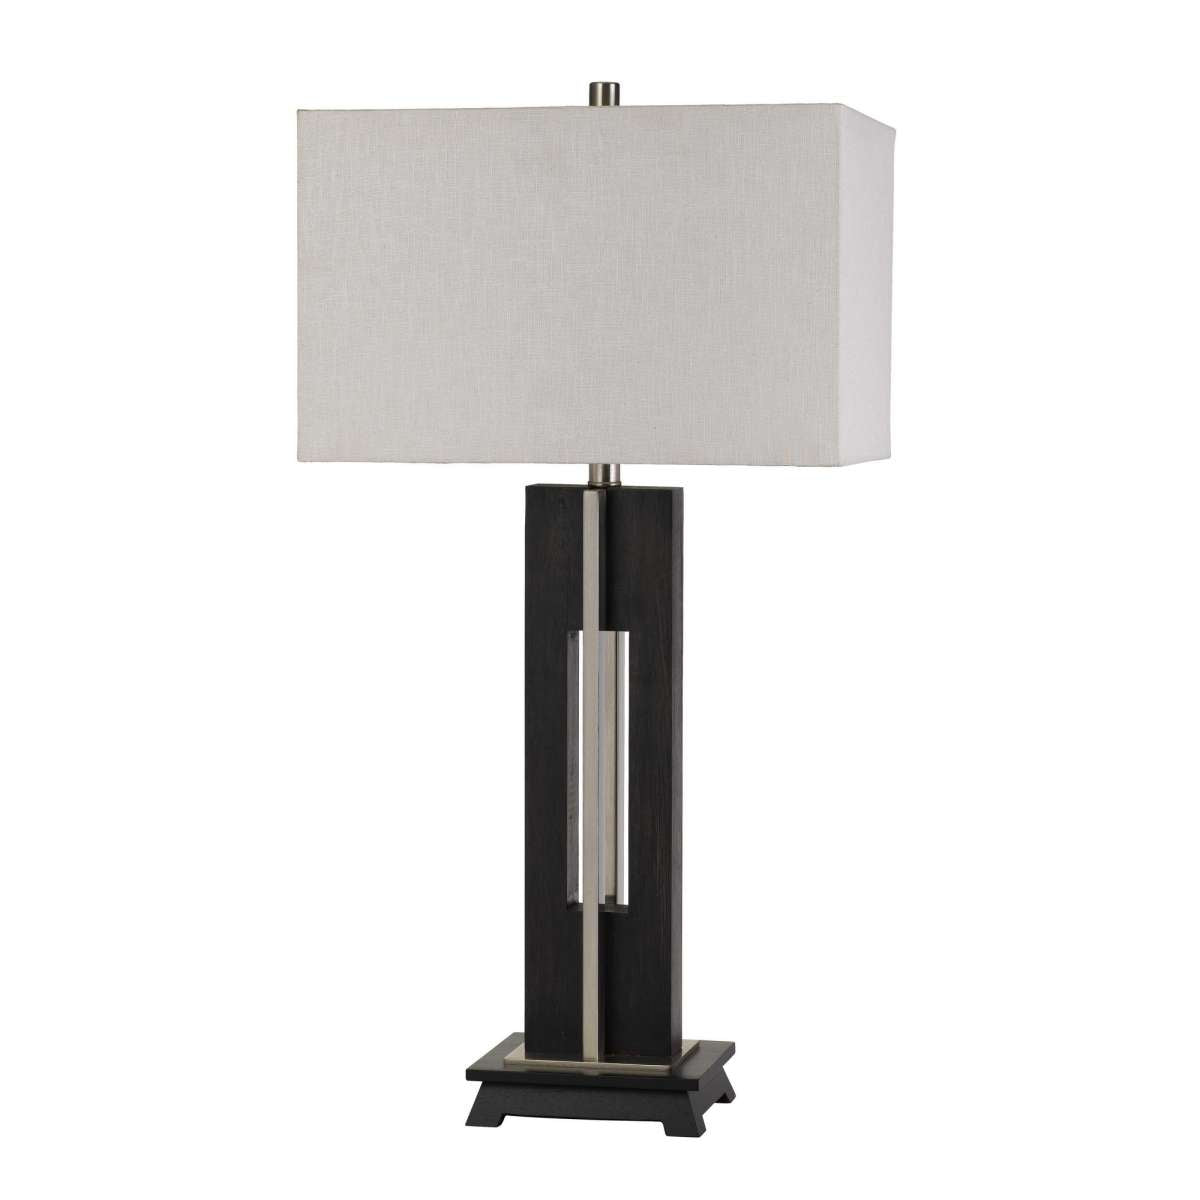 33" Metal Table Lamp With Sturdy Base, Black And White By Benzara